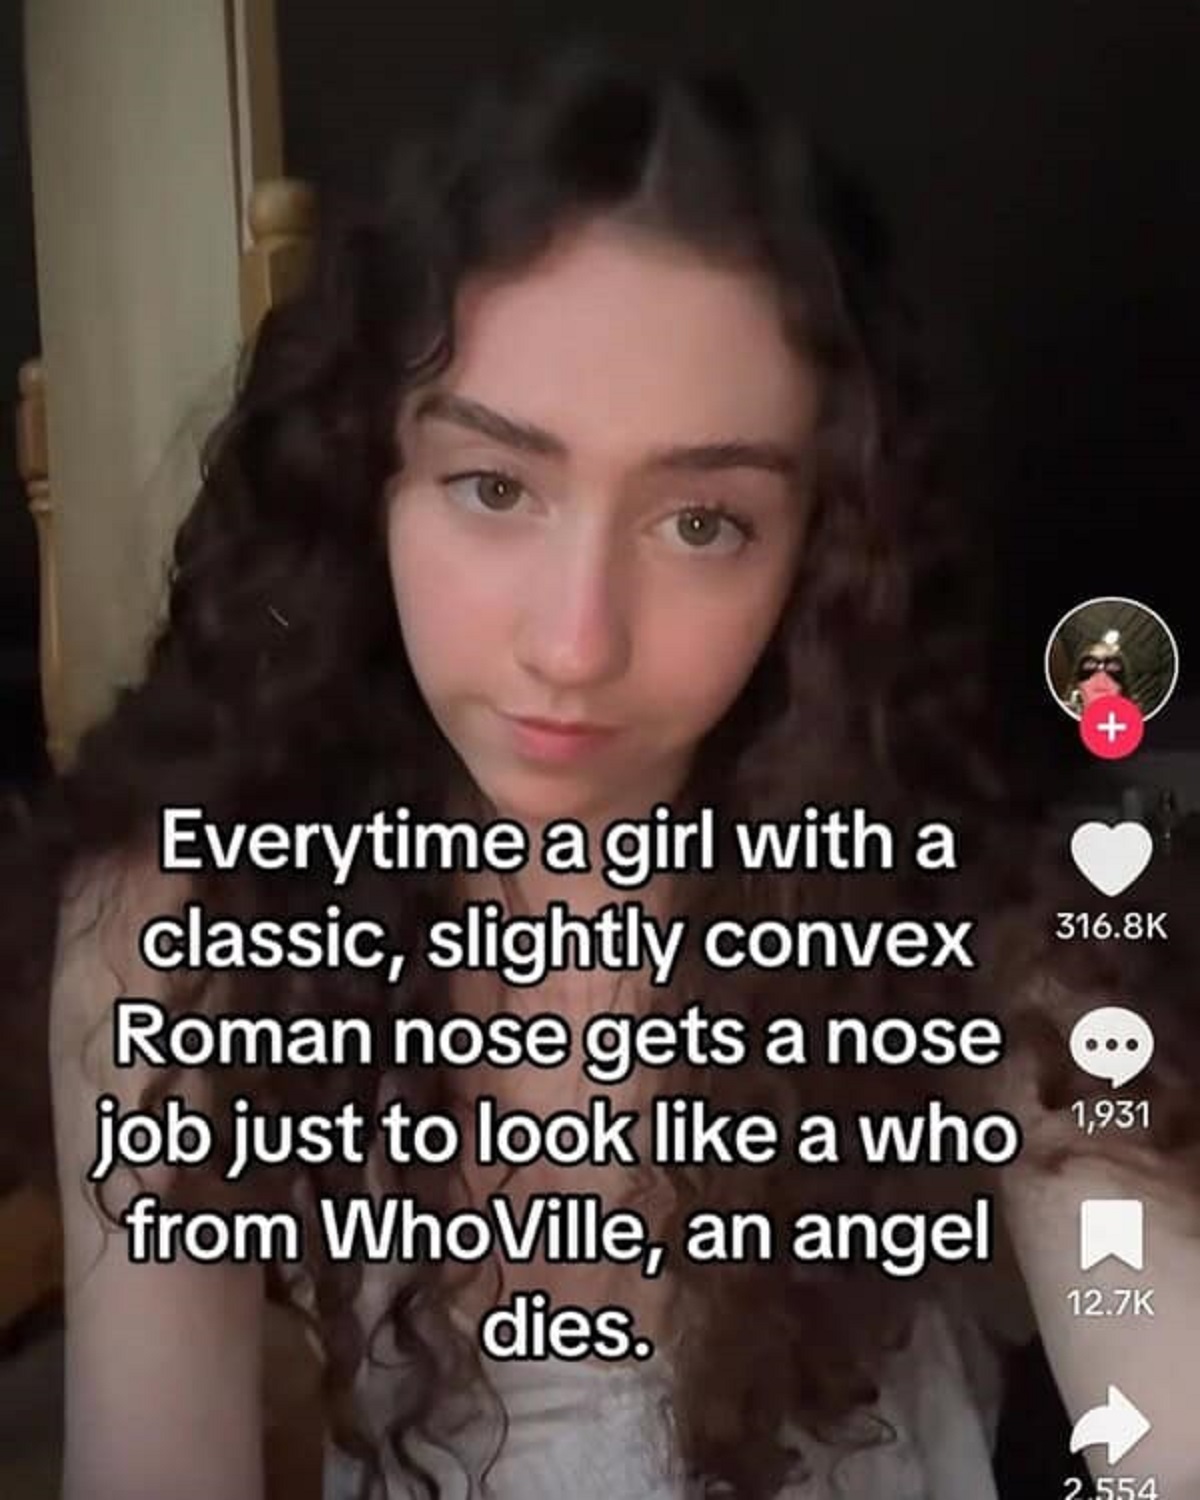 photo caption - Everytime a girl with a classic, slightly convex Roman nose gets a nose job just to look a who 1,931 from WhoVille, an angel A dies. 2.554